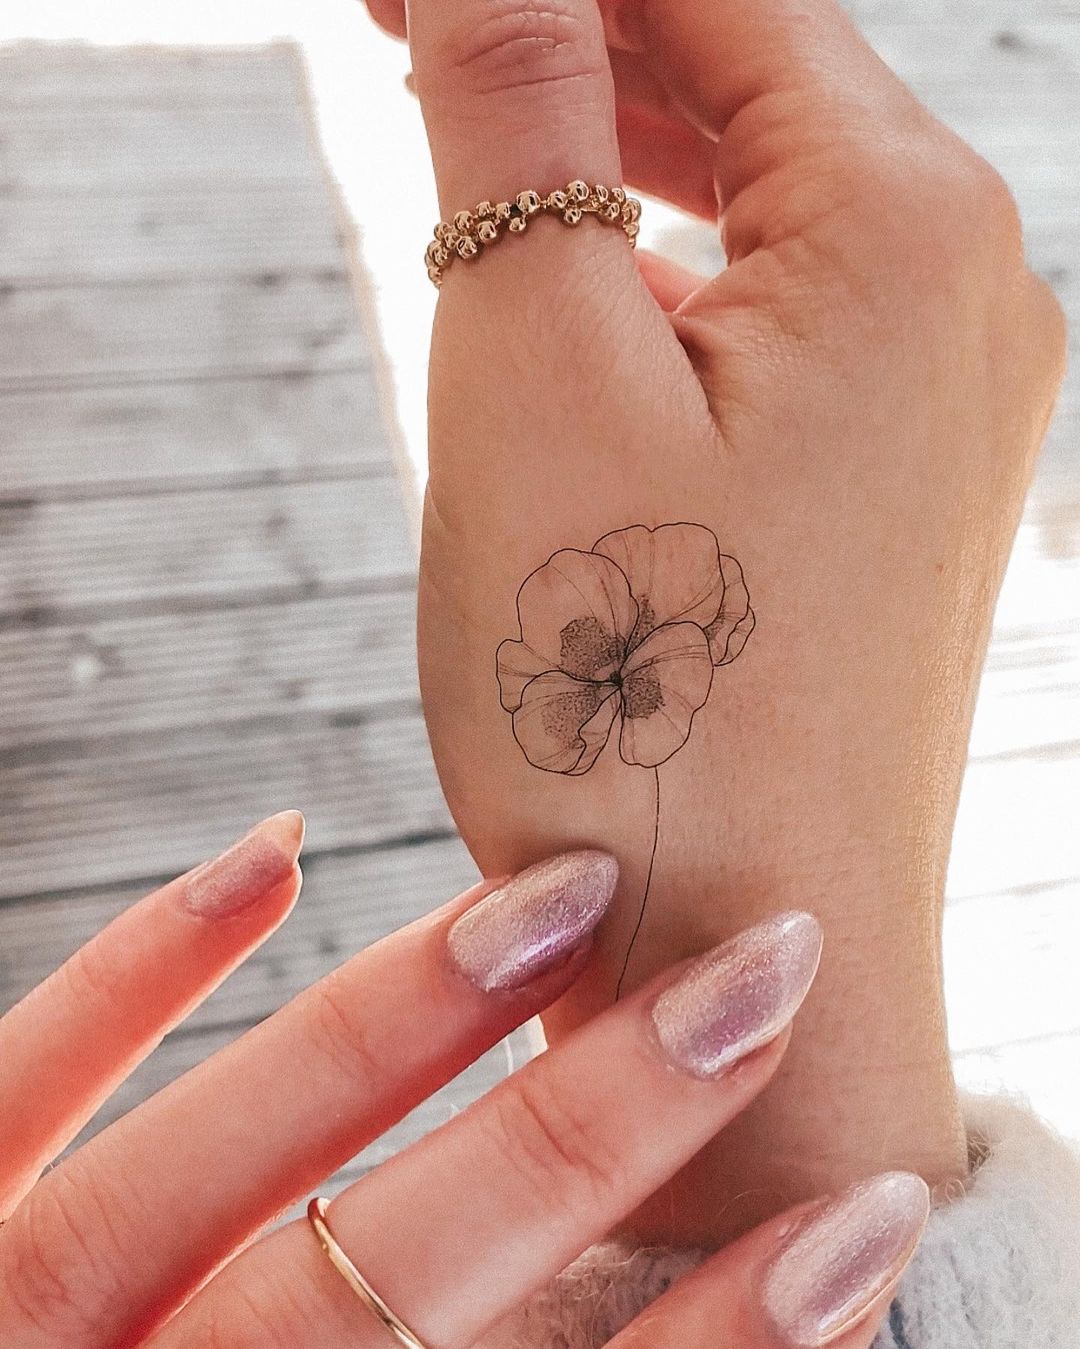 Clean The Skin For Temporary Tattoo